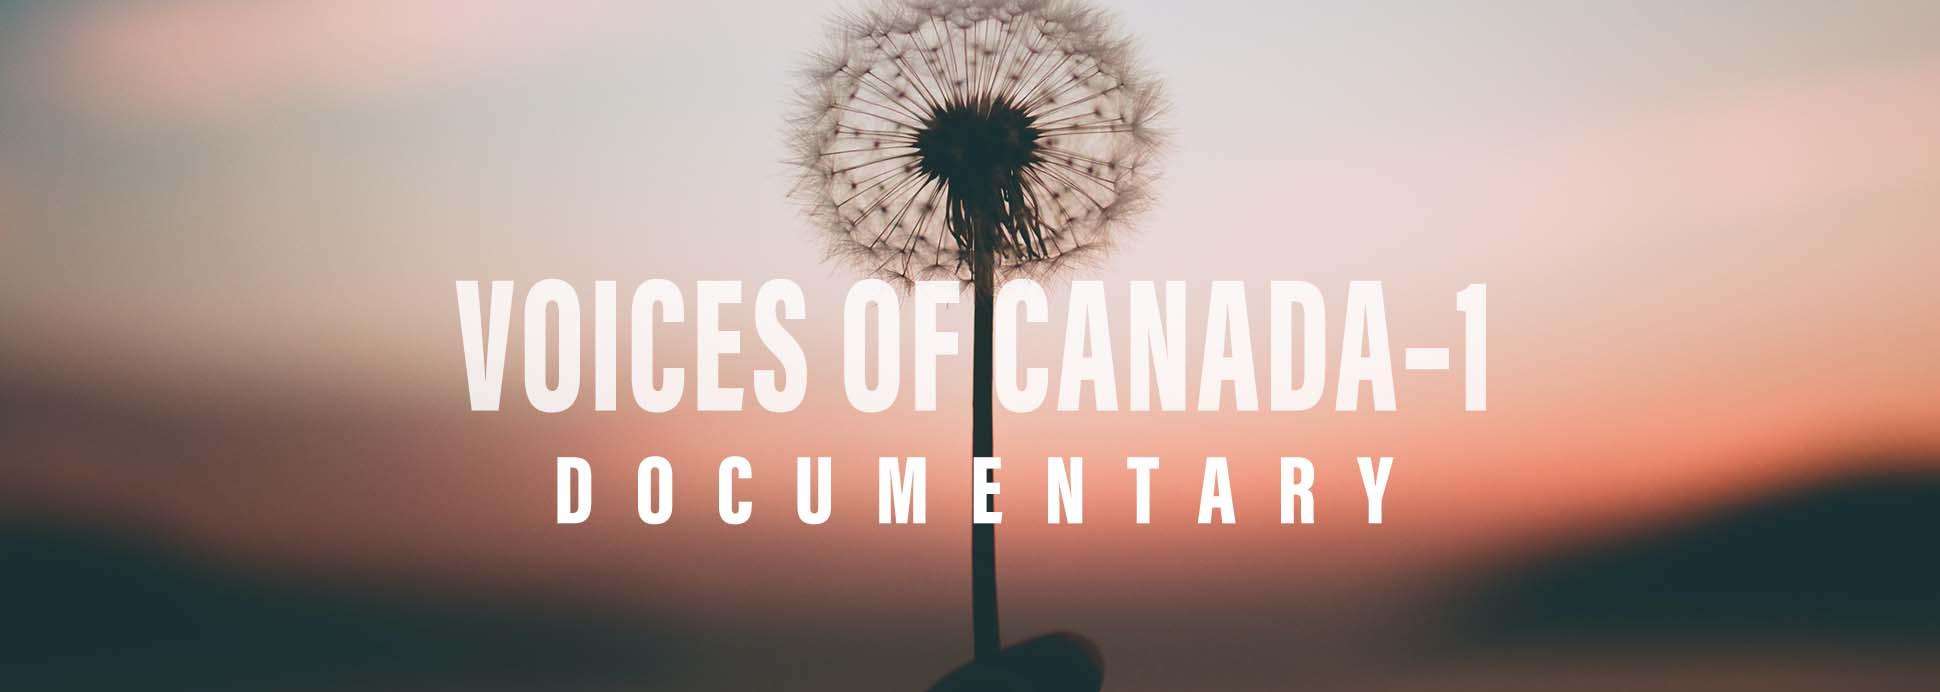 Voices of Canada 1